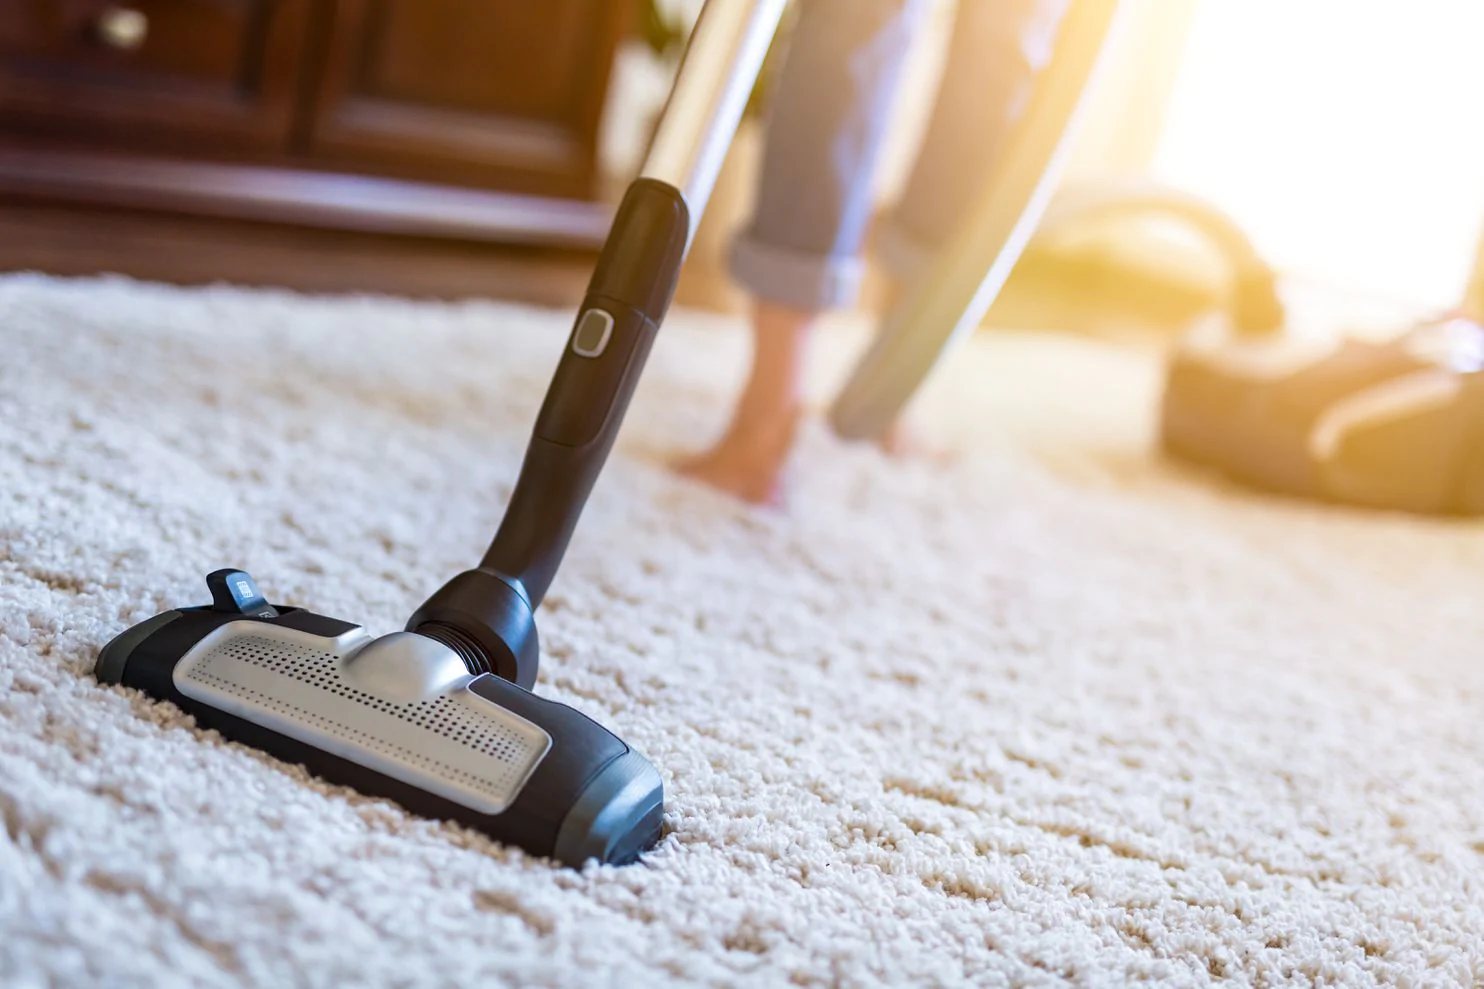 Carpet Cleaning is Essential